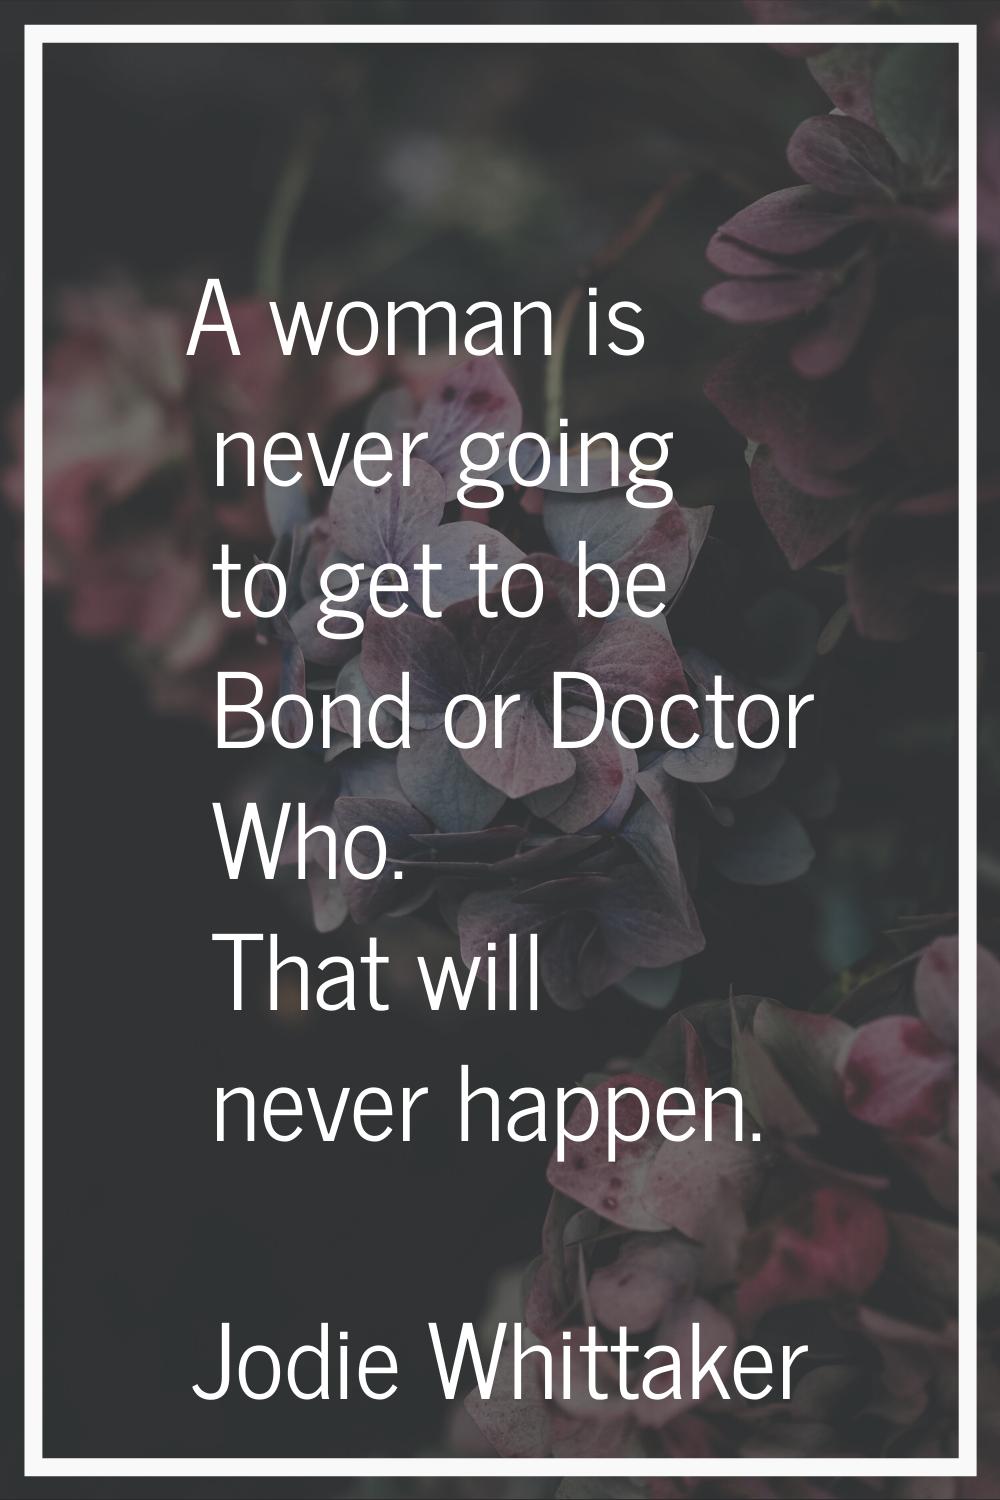 A woman is never going to get to be Bond or Doctor Who. That will never happen.